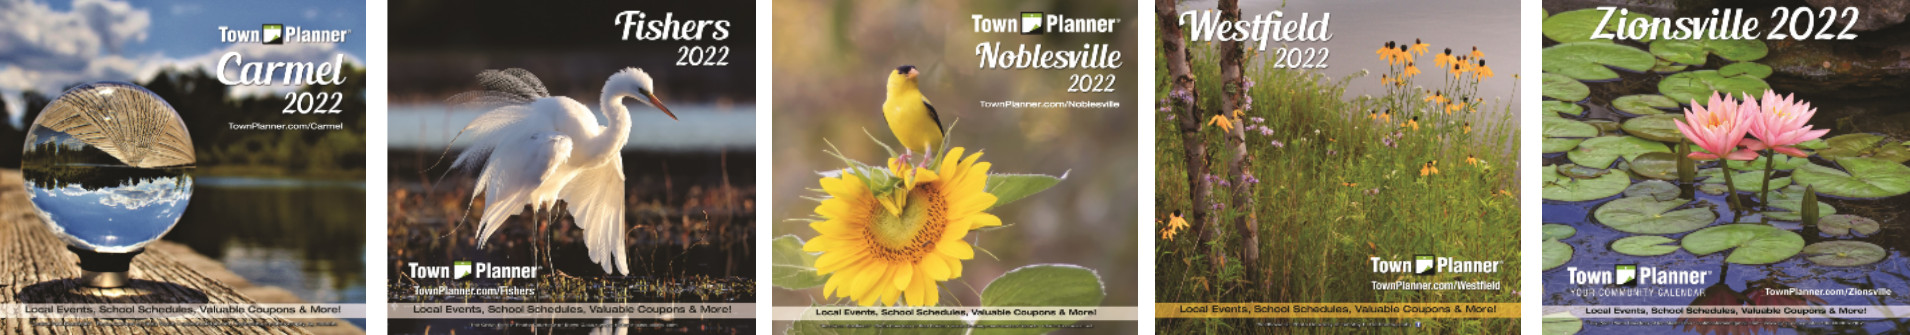 Rates Town Planner Indy North